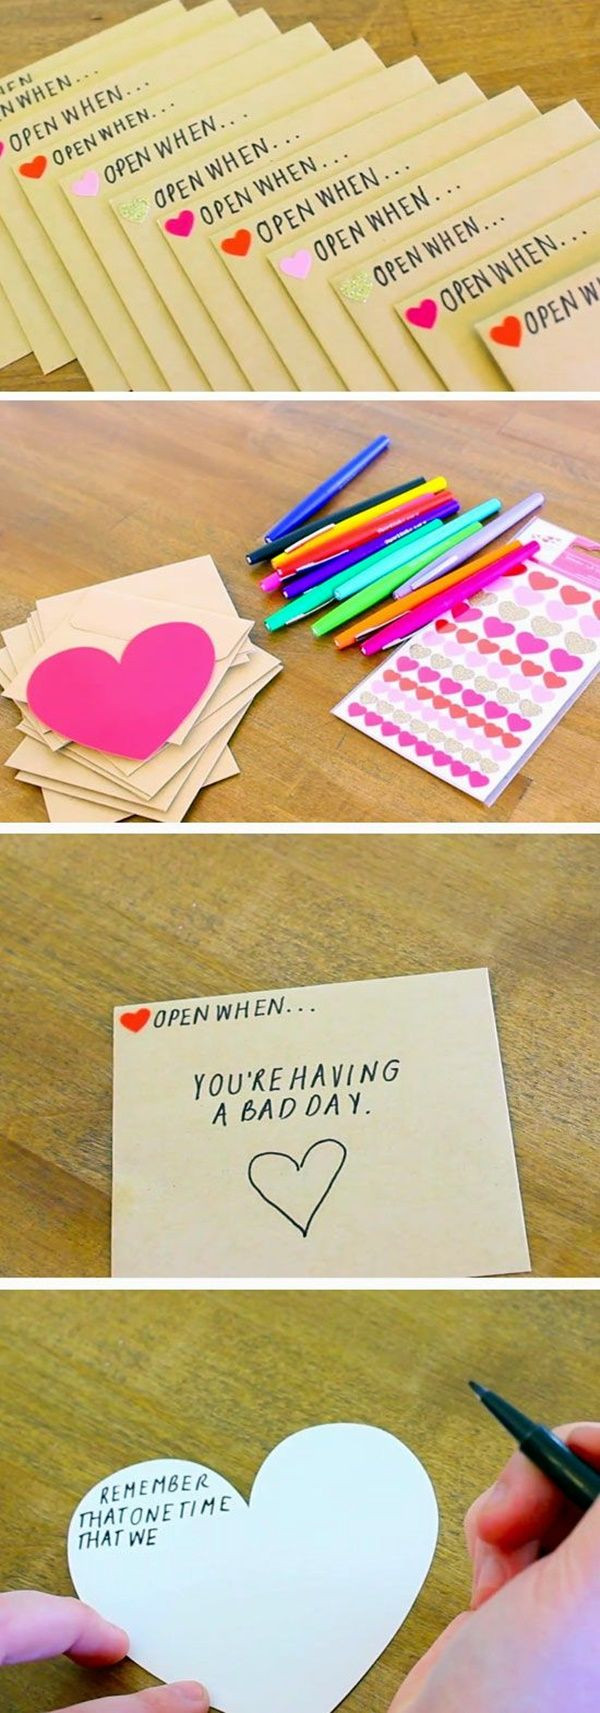 Homemade Boyfriend Gift Ideas
 101 Homemade Valentines Day Ideas for Him that re really